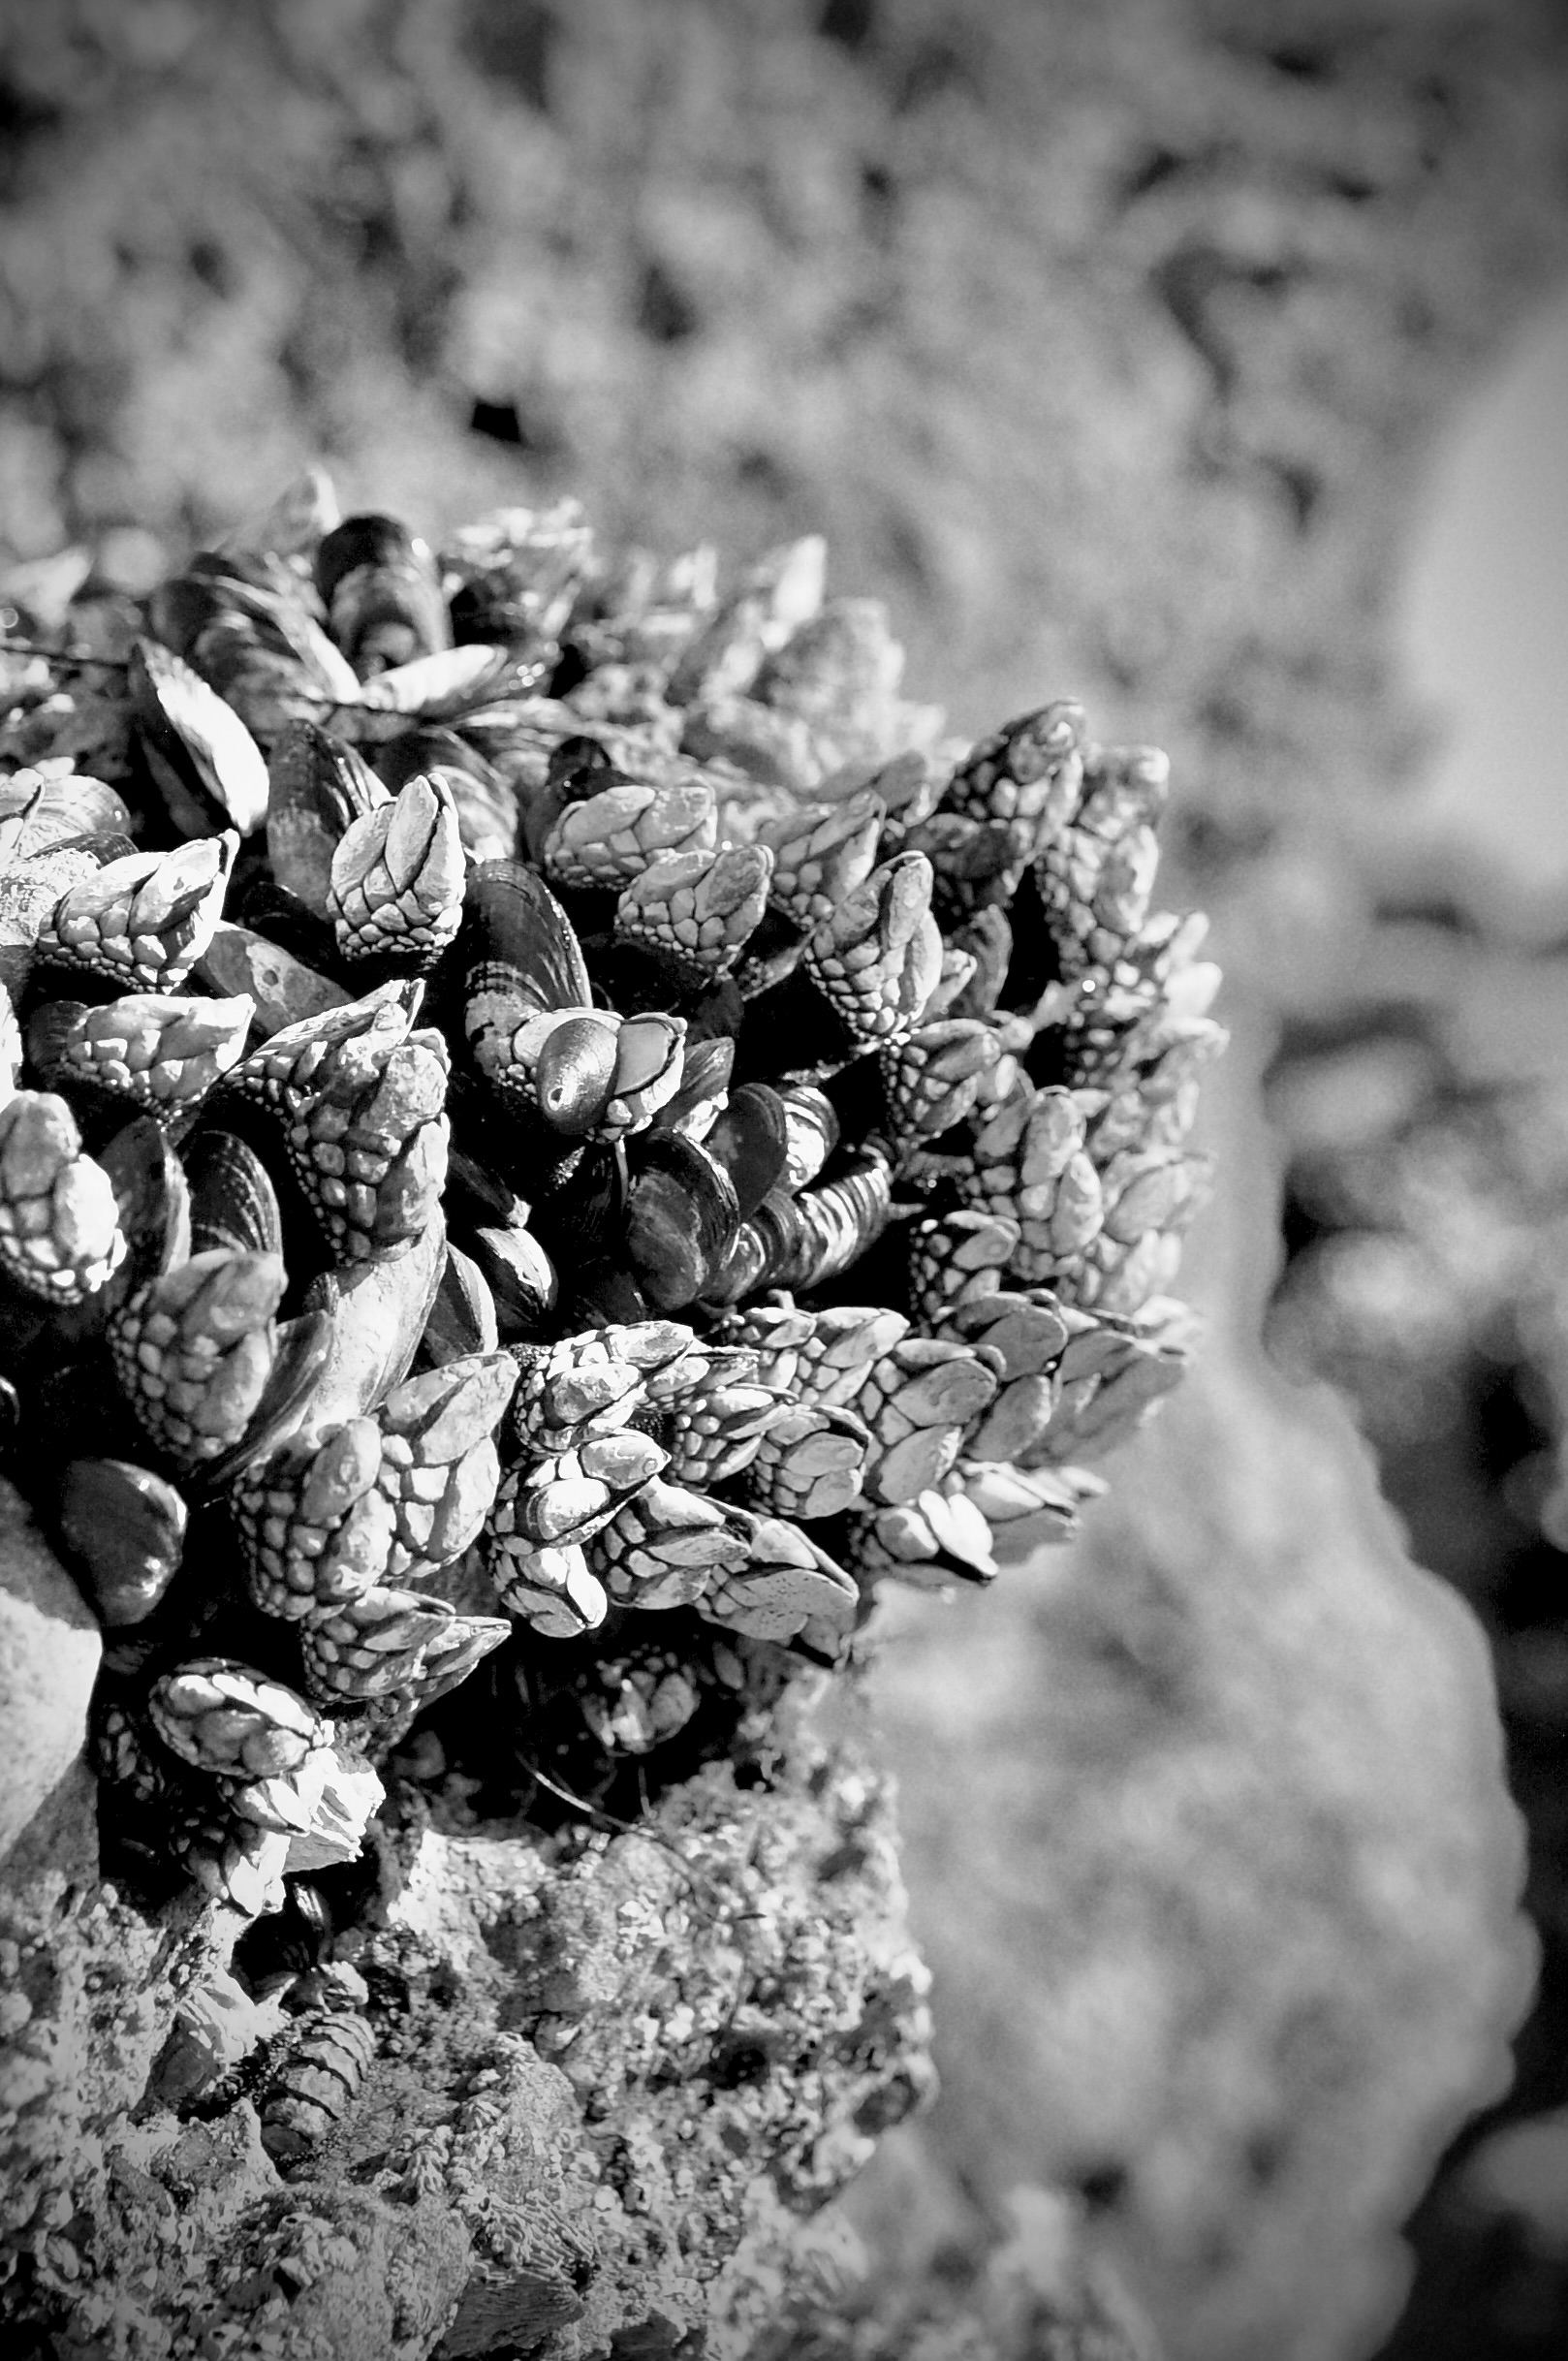 barnacles, mussels, tide pools, low tide, southern california